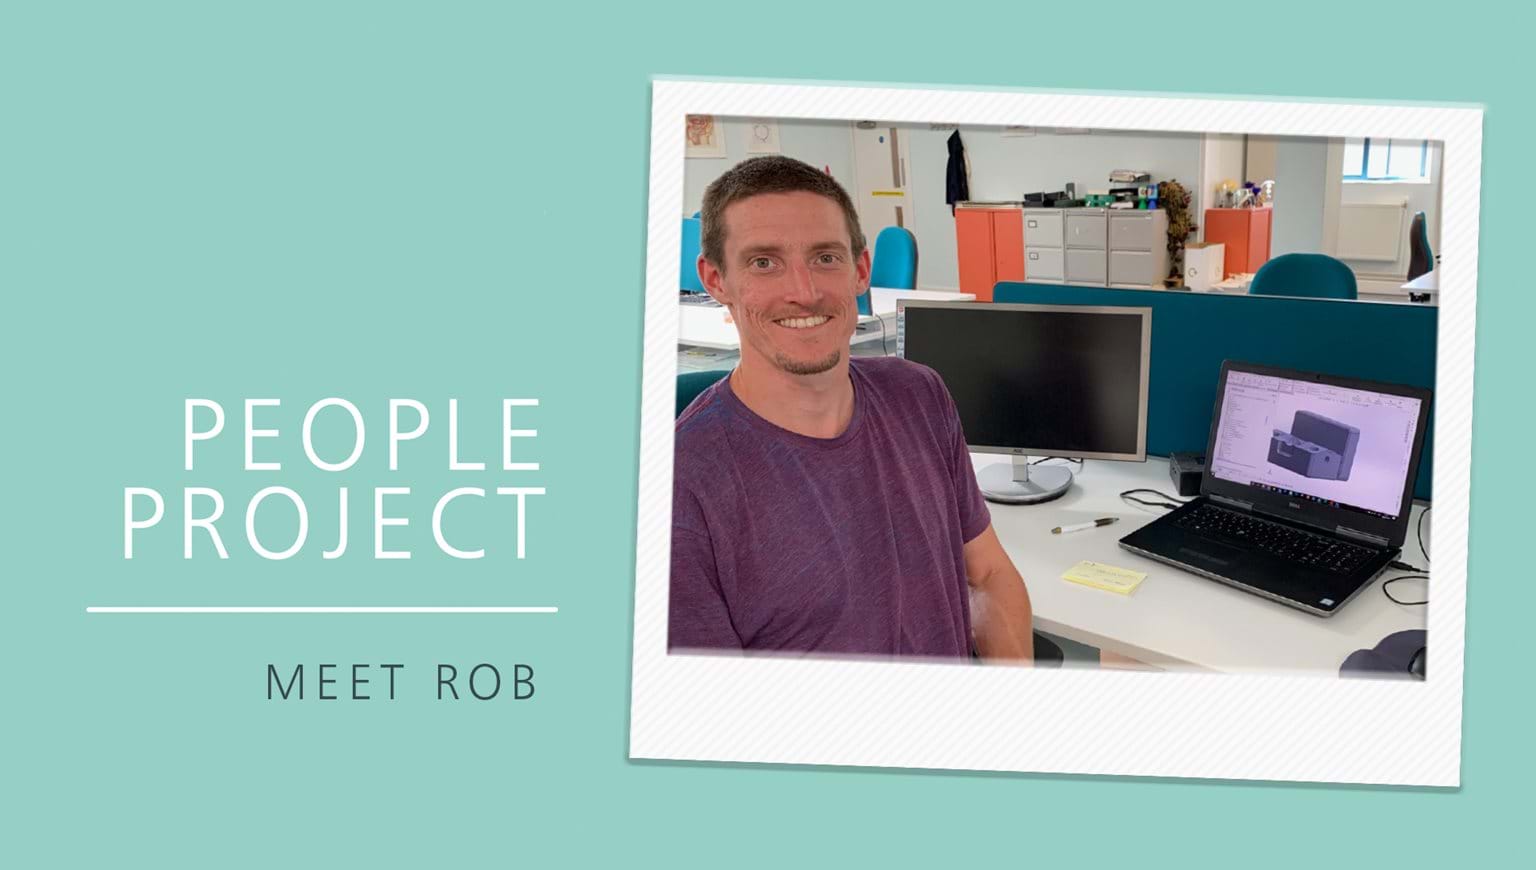 People Project - Meet Rob